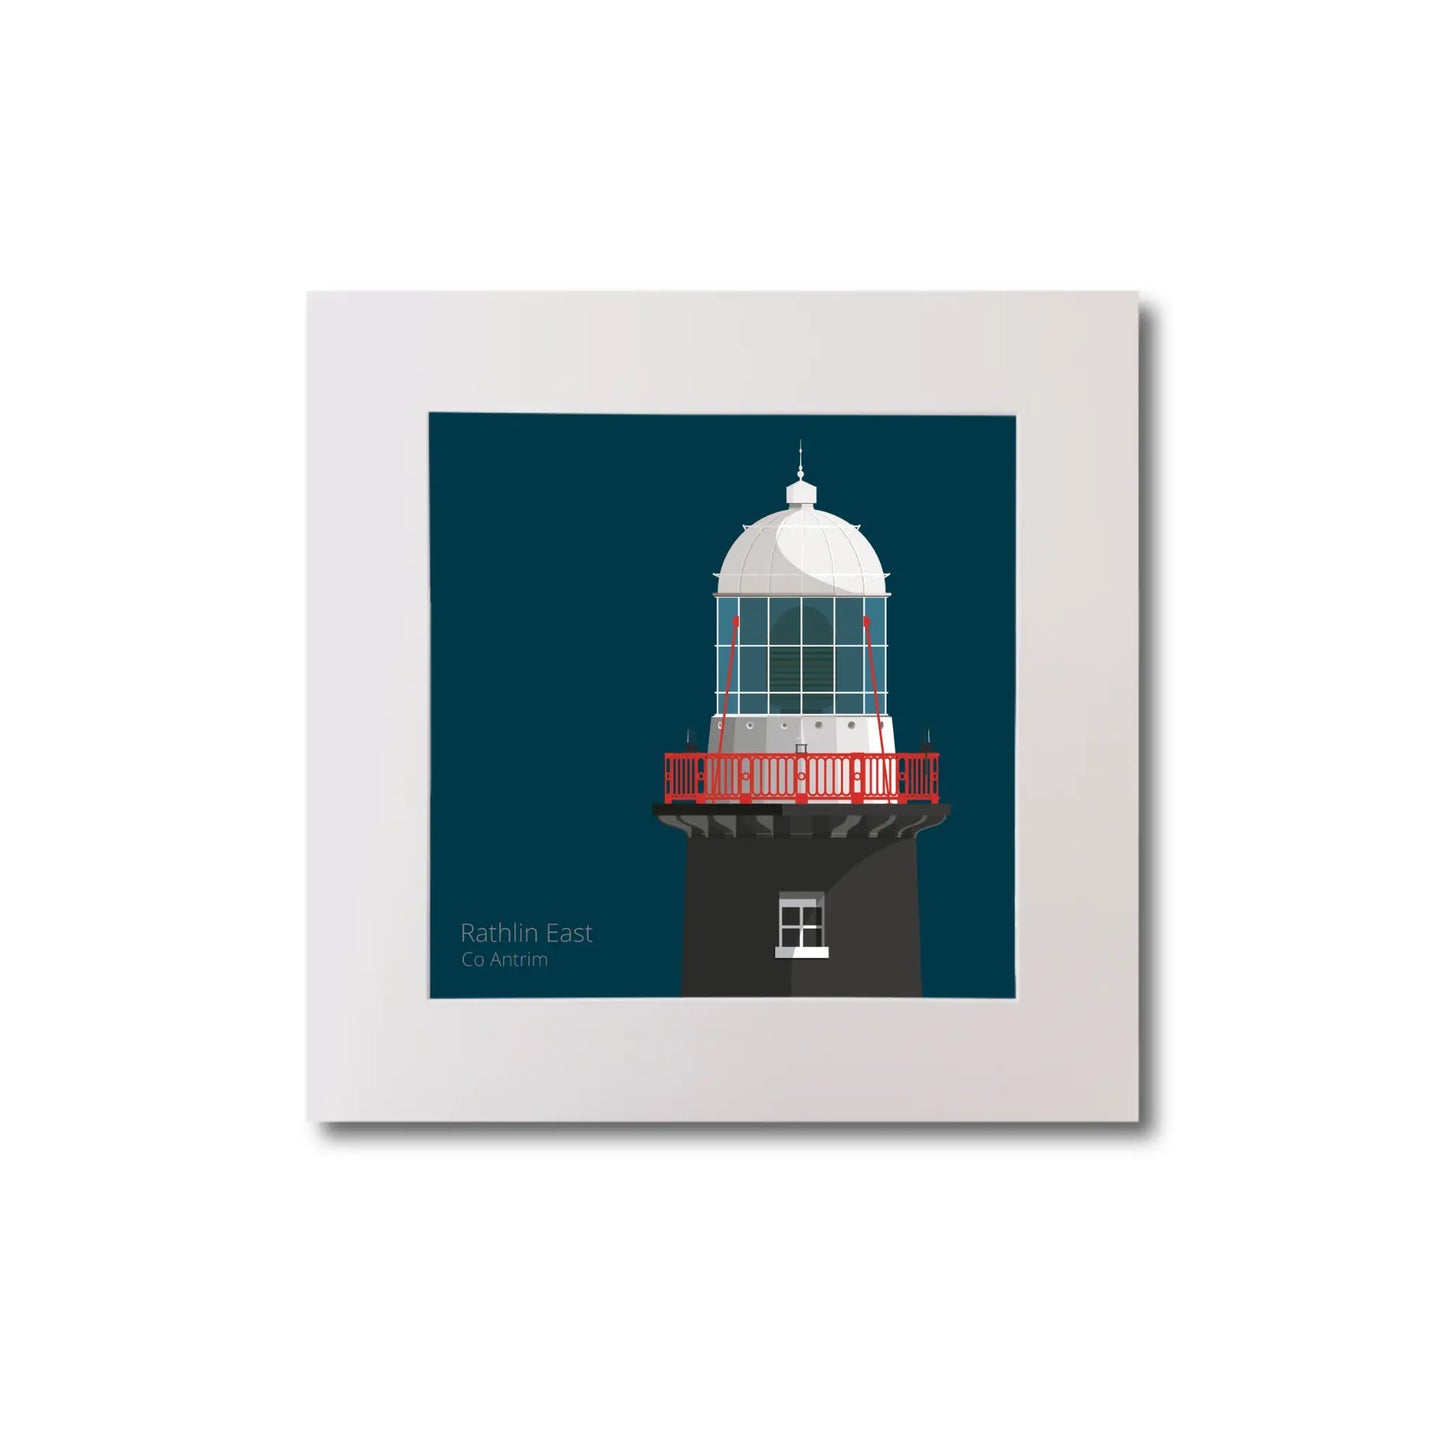 Illustration of Rathlin East lighthouse on a midnight blue background, mounted and measuring 20x20cm.